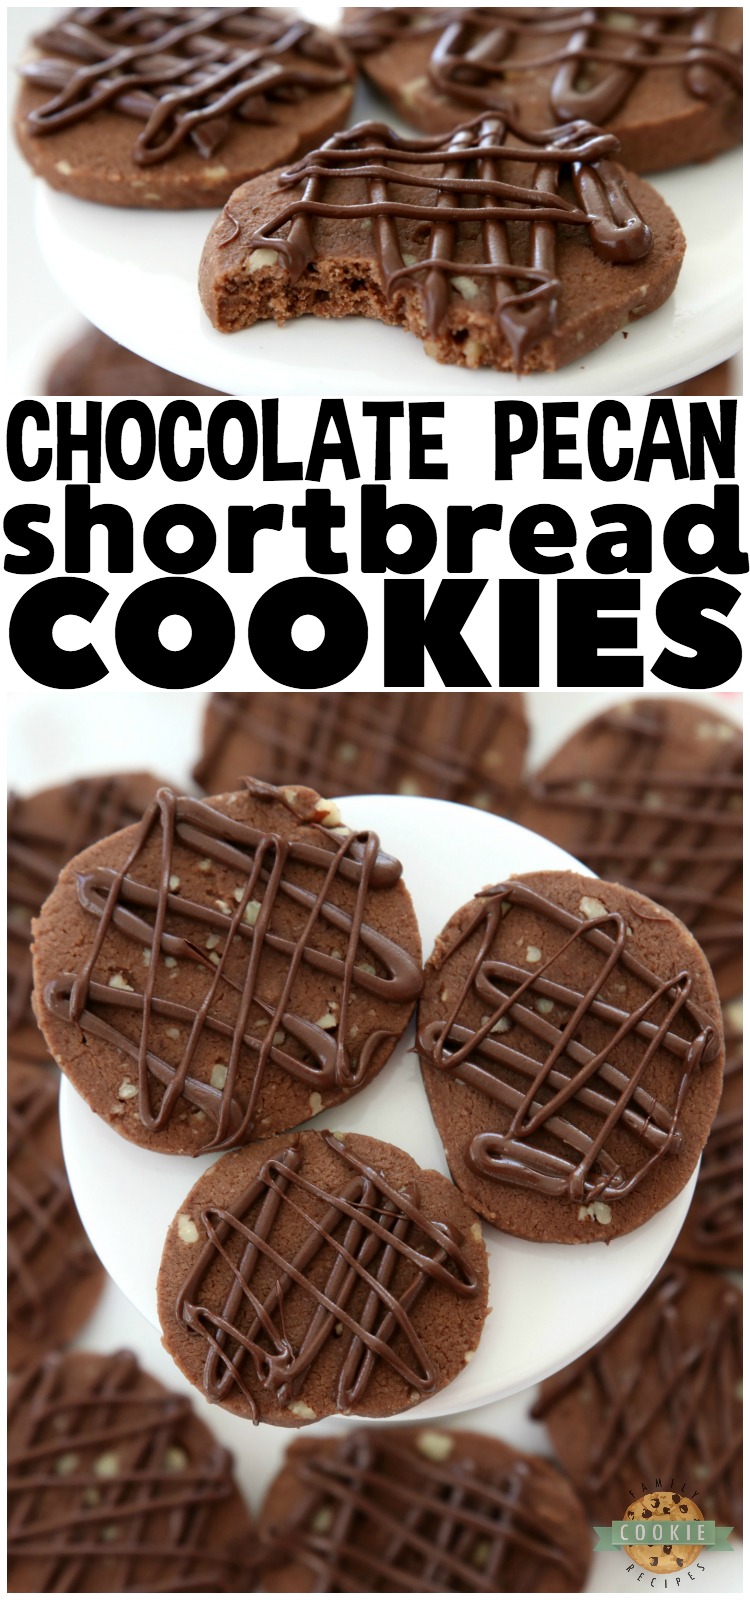 Chocolate Pecan Shortbread Cookies made by adding chopped pecans to our buttery chocolate shortbread then drizzling them with melted chocolate. These incredible shortbread cookies melt in your mouth and have the best chocolate flavor! #COOKIES #shortbread #butter #baking #chocolate #pecan #Christmas #cookie #recipe from FAMILY COOKIE RECIPES